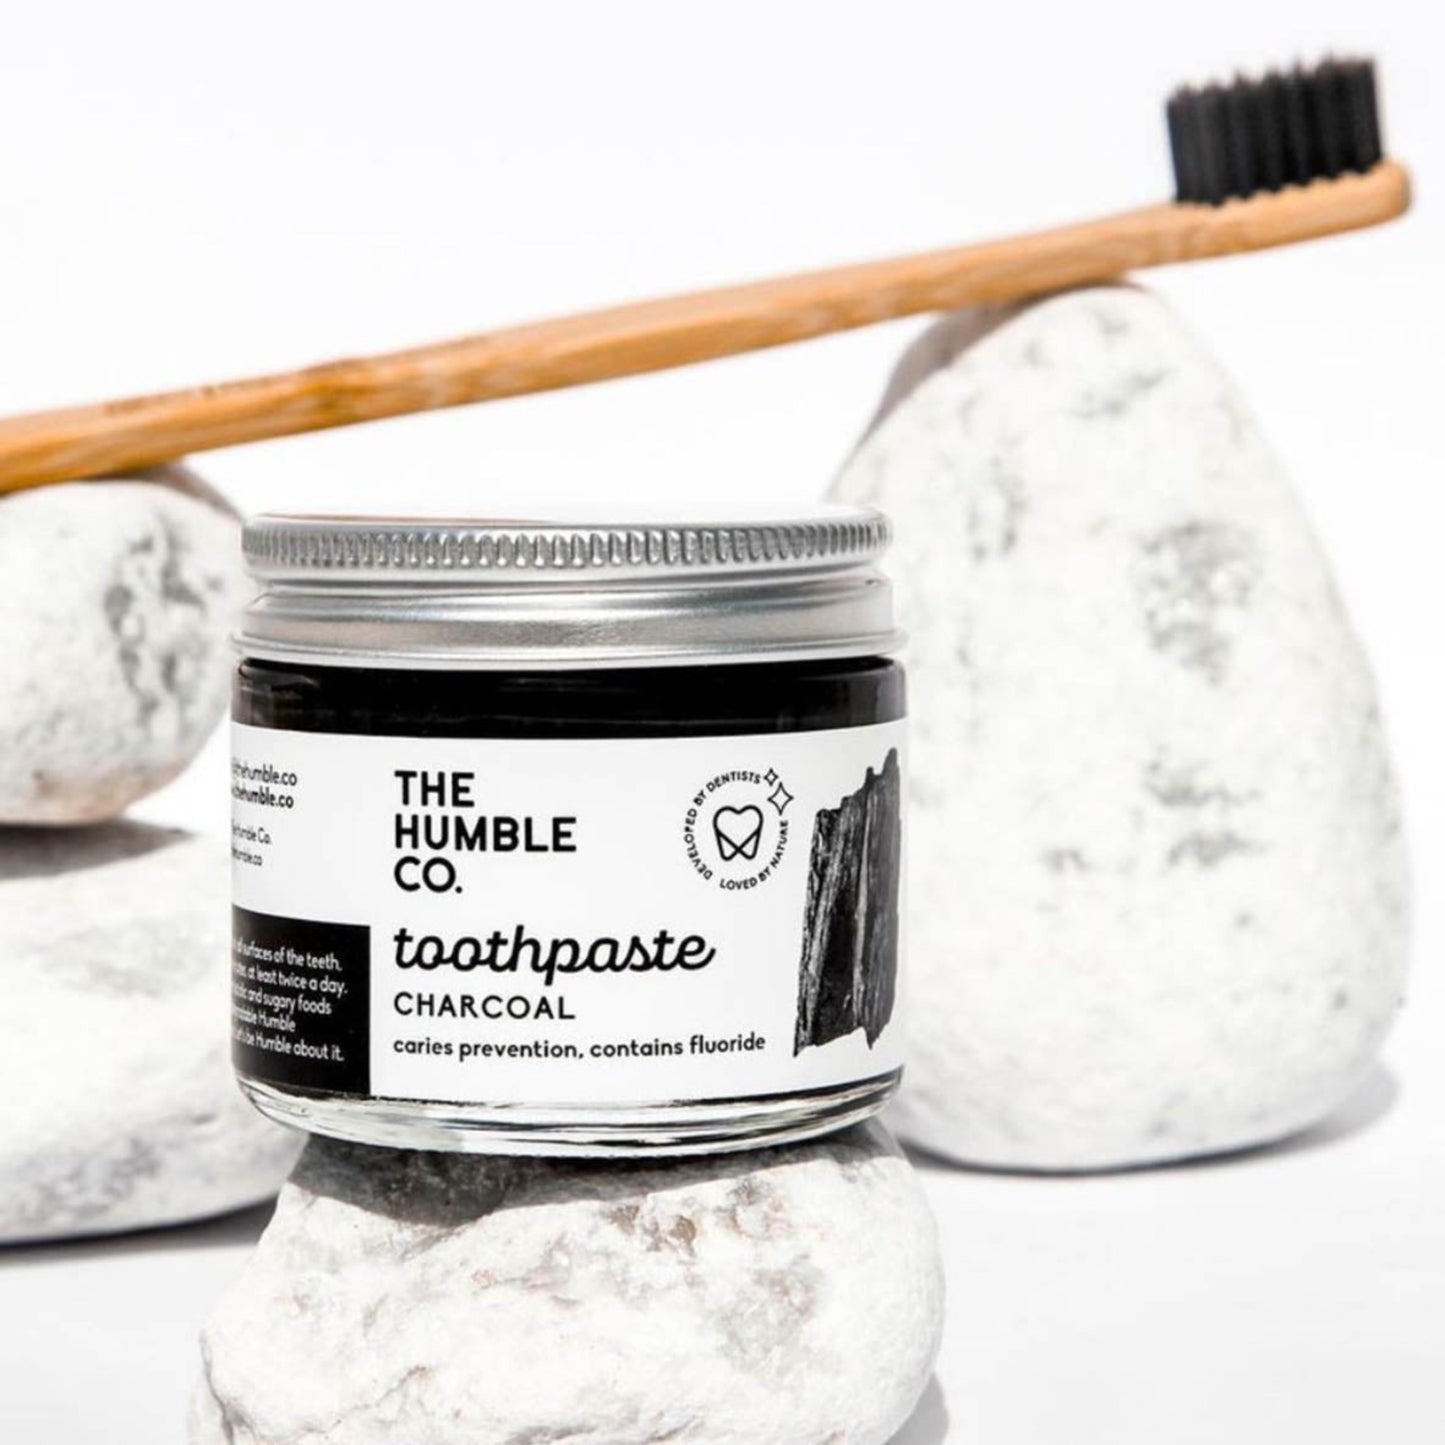 THE HUMBLE CO. Toothpaste in Glass Jar 50ml with Flouride (4620415303745)